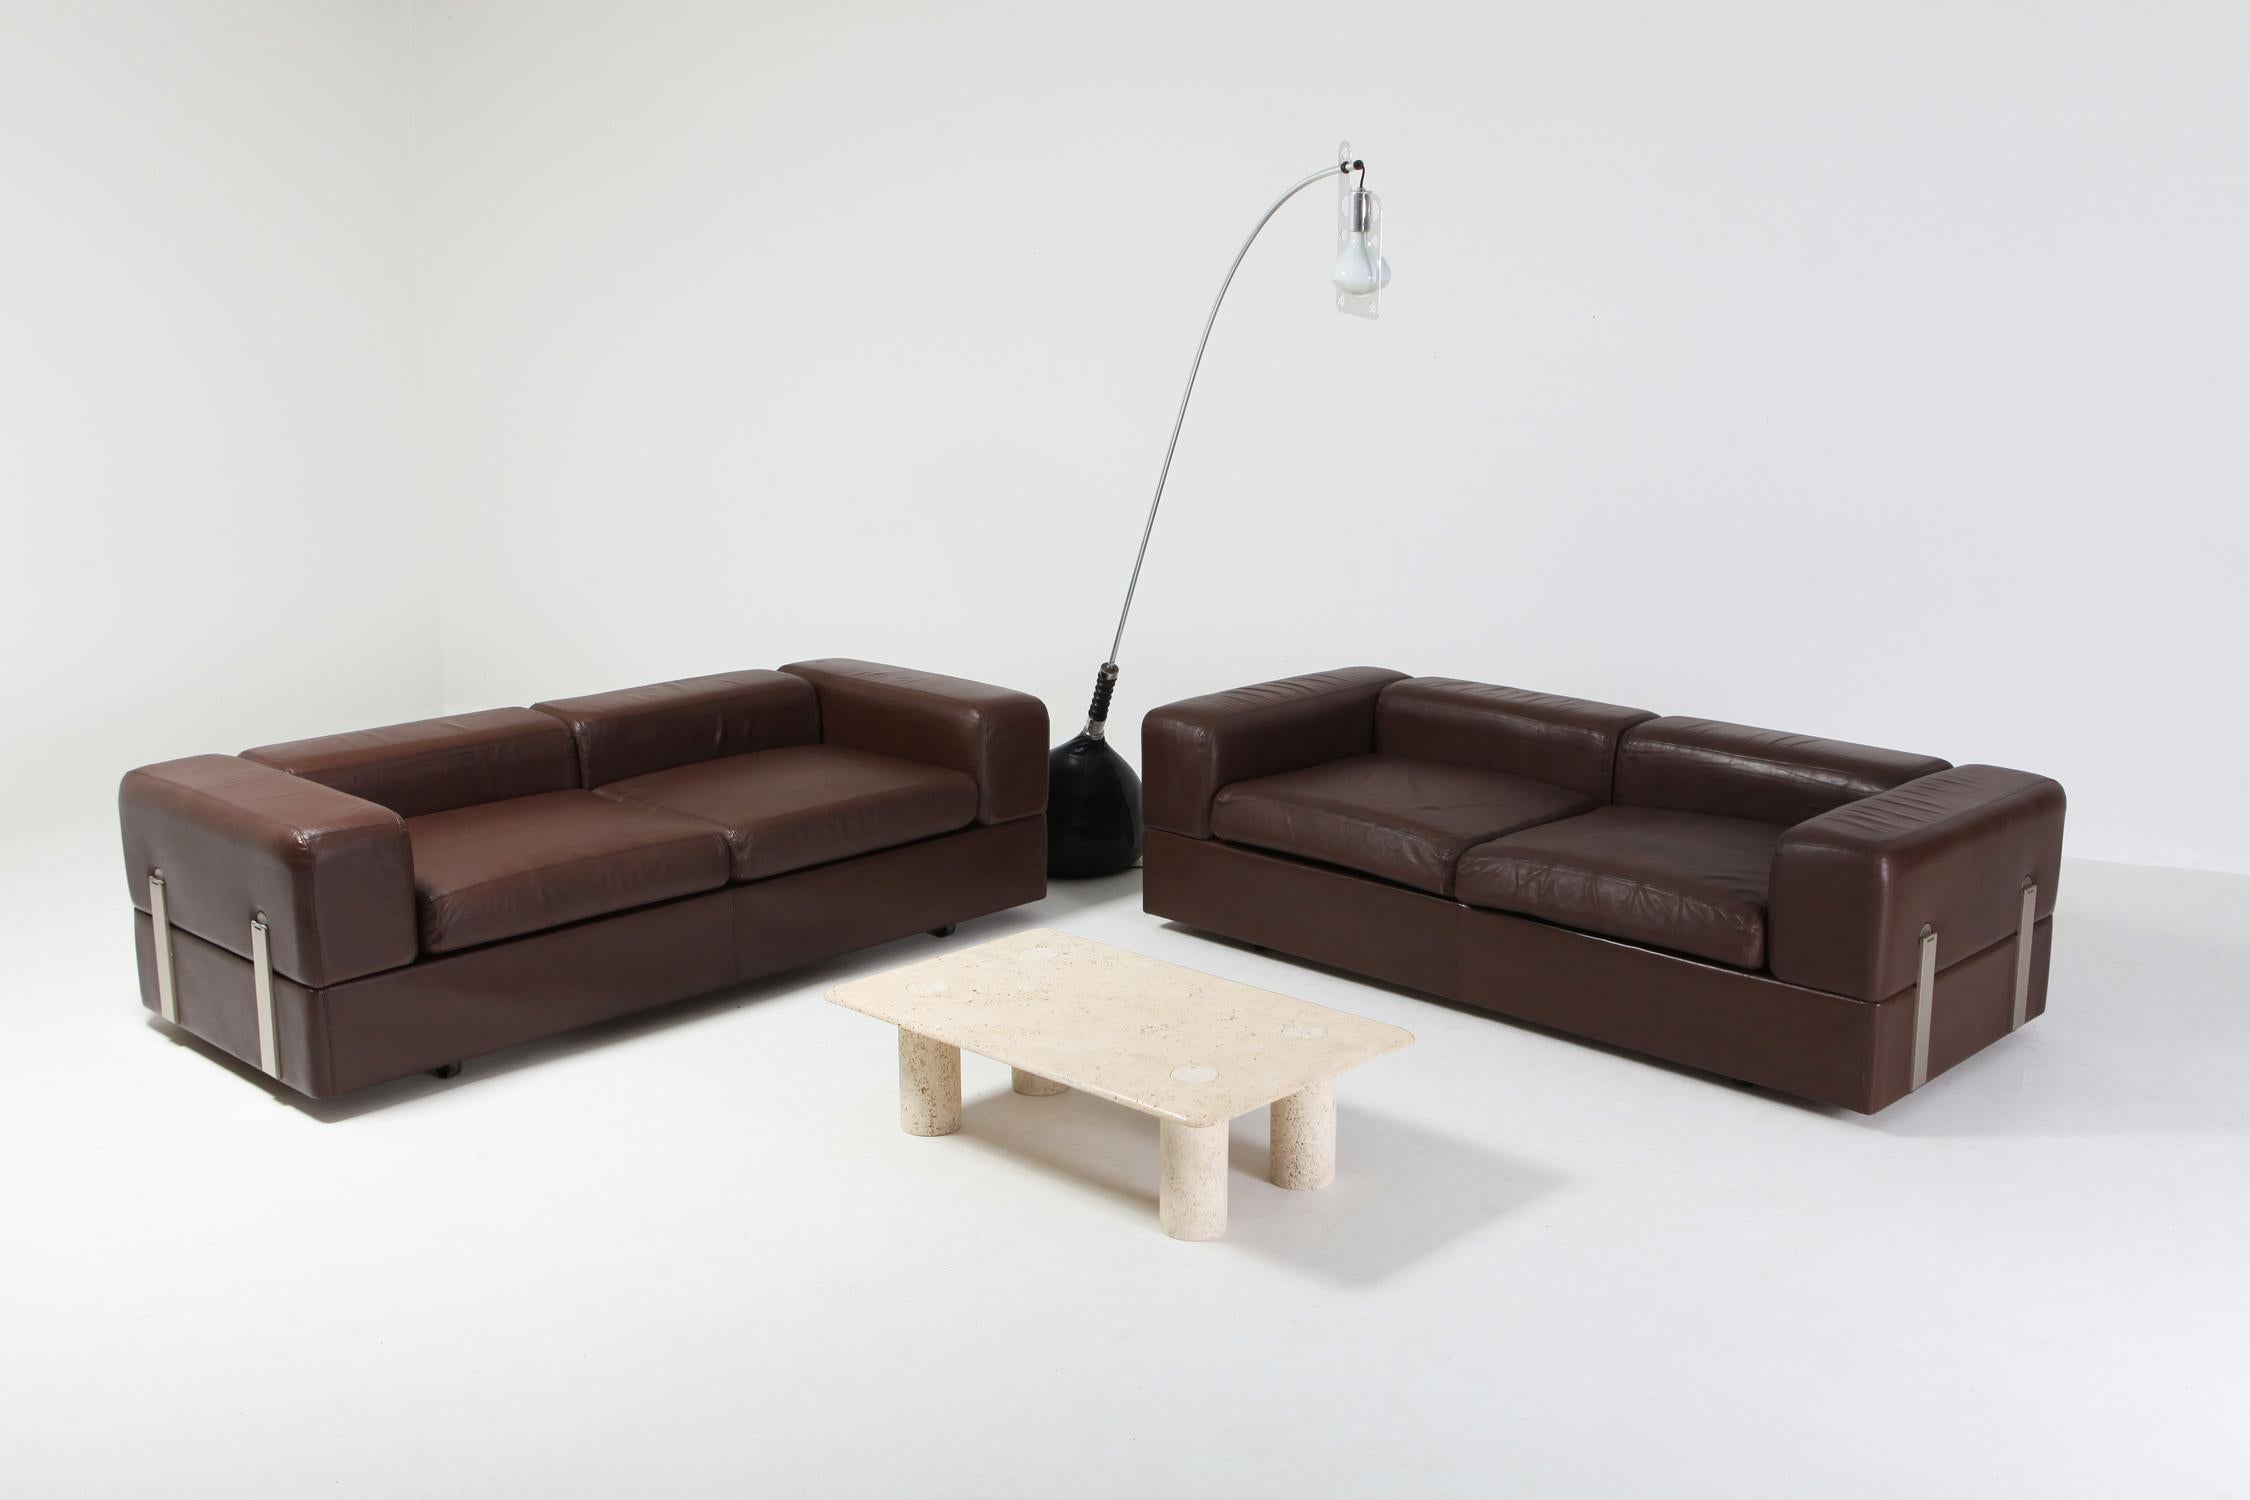 Post-Modern Daybed Sofa Set of 2 711 by Tito Agnoli for Cinova in Brown Leather